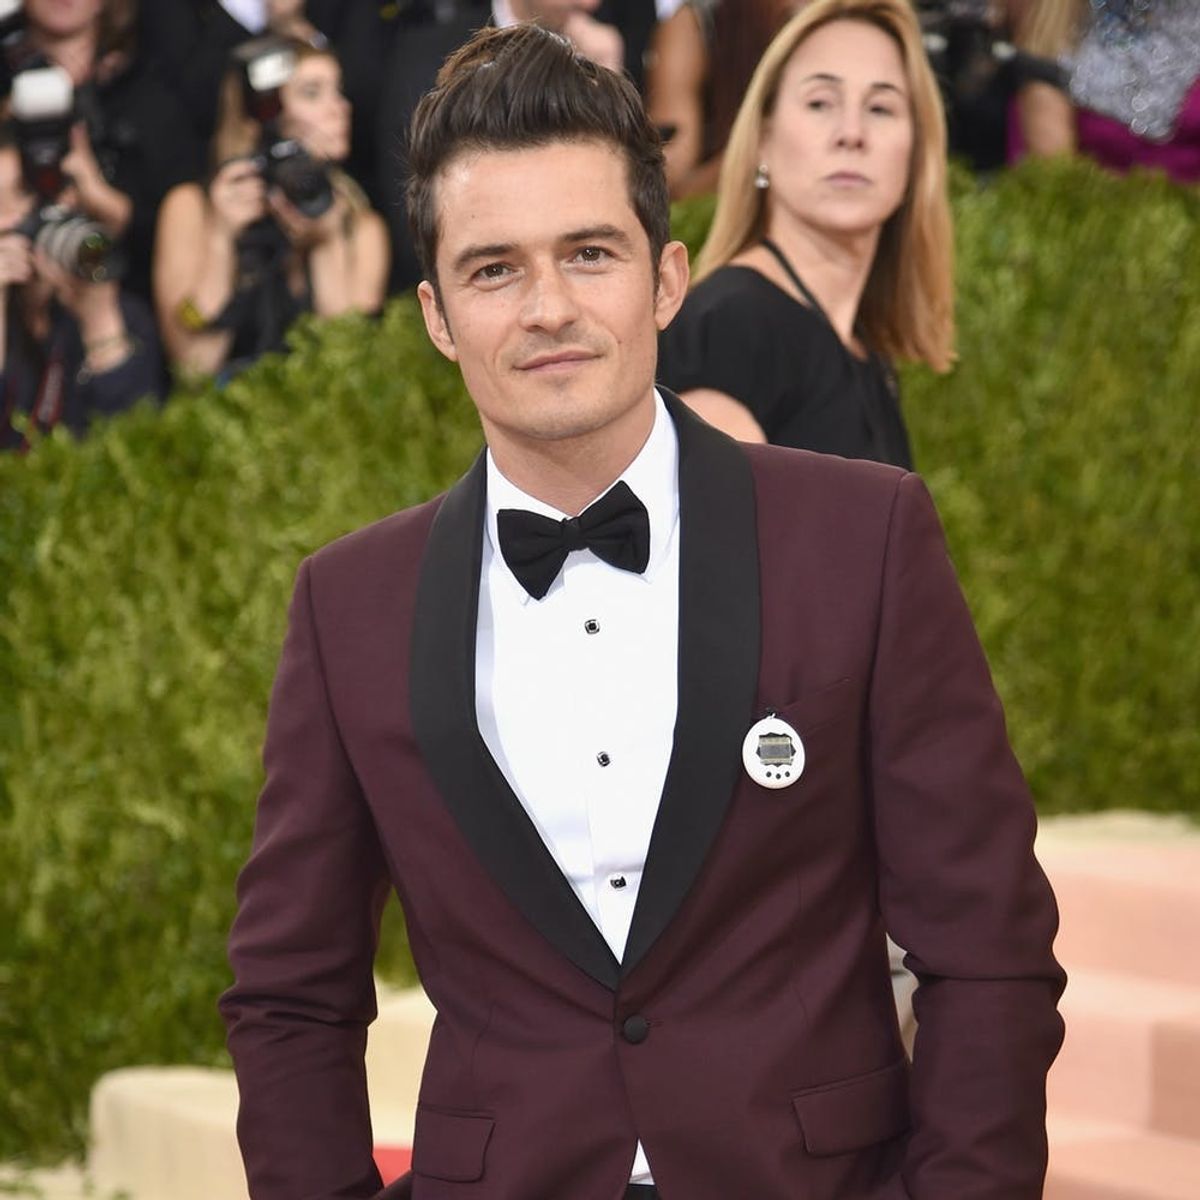 Katy Perry and Orlando Bloom Wore These Surprising Matching Accessories to the Met Gala